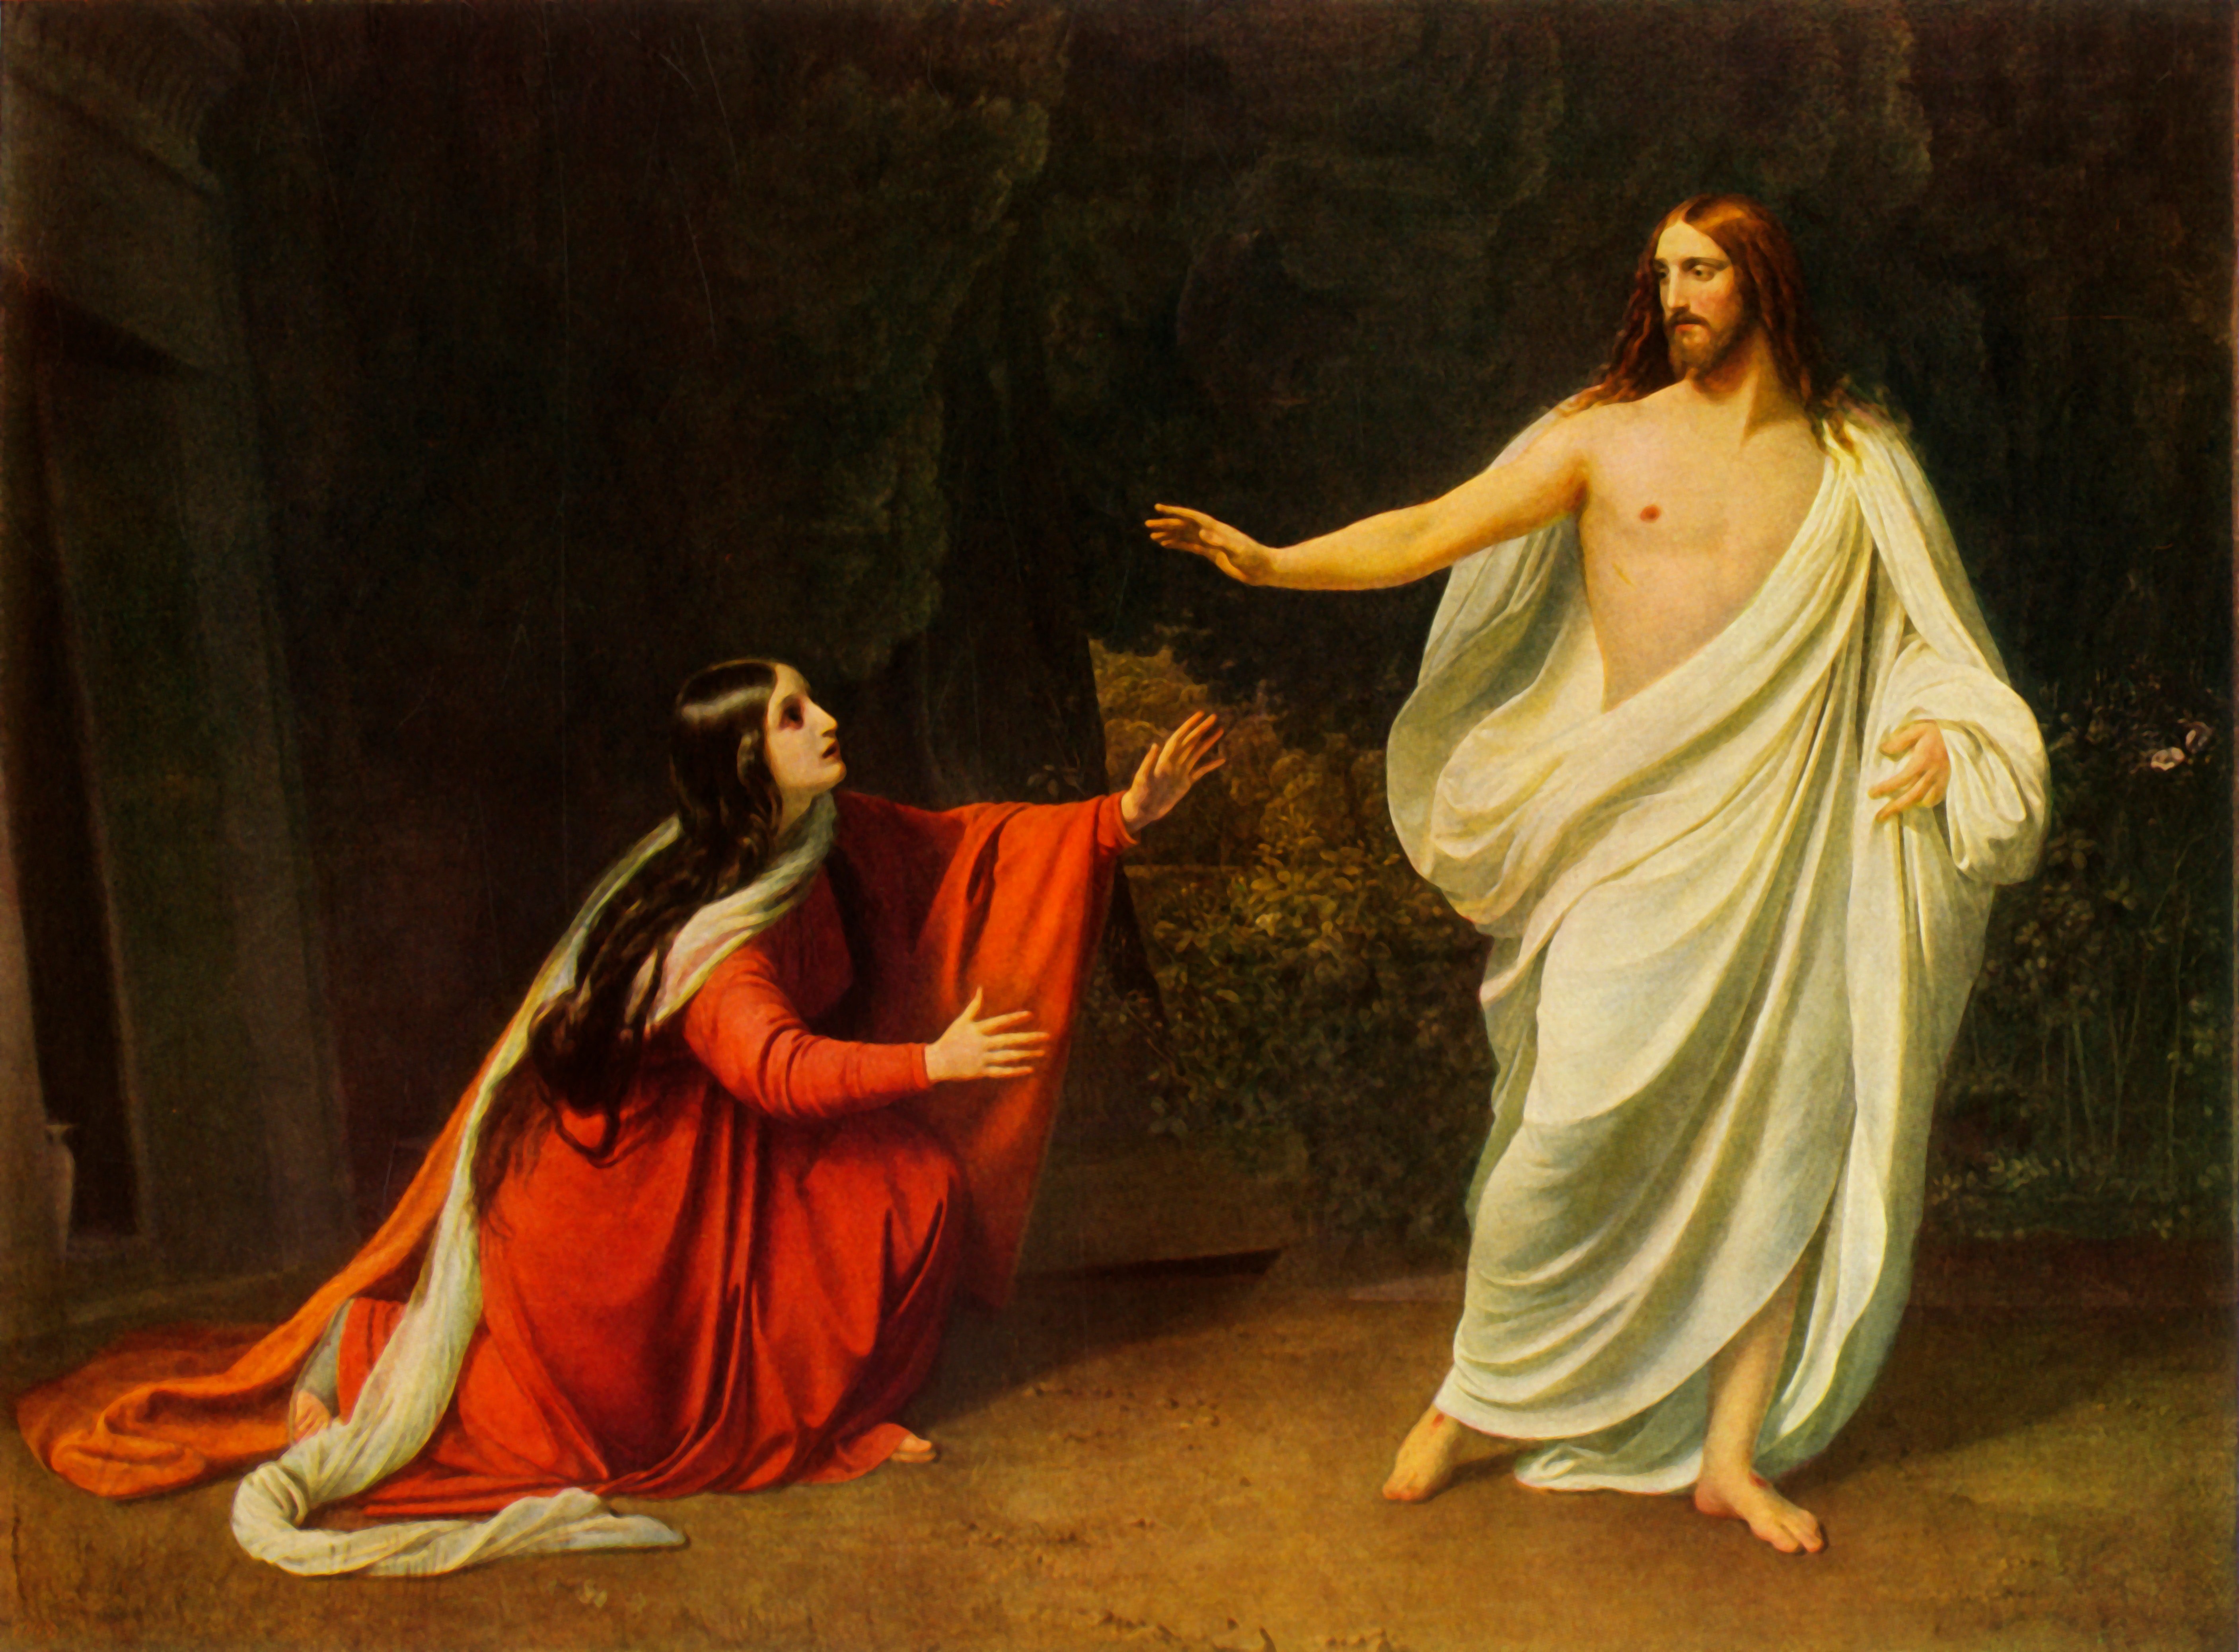 Mary Magdalene reaching out to Jesus Christ